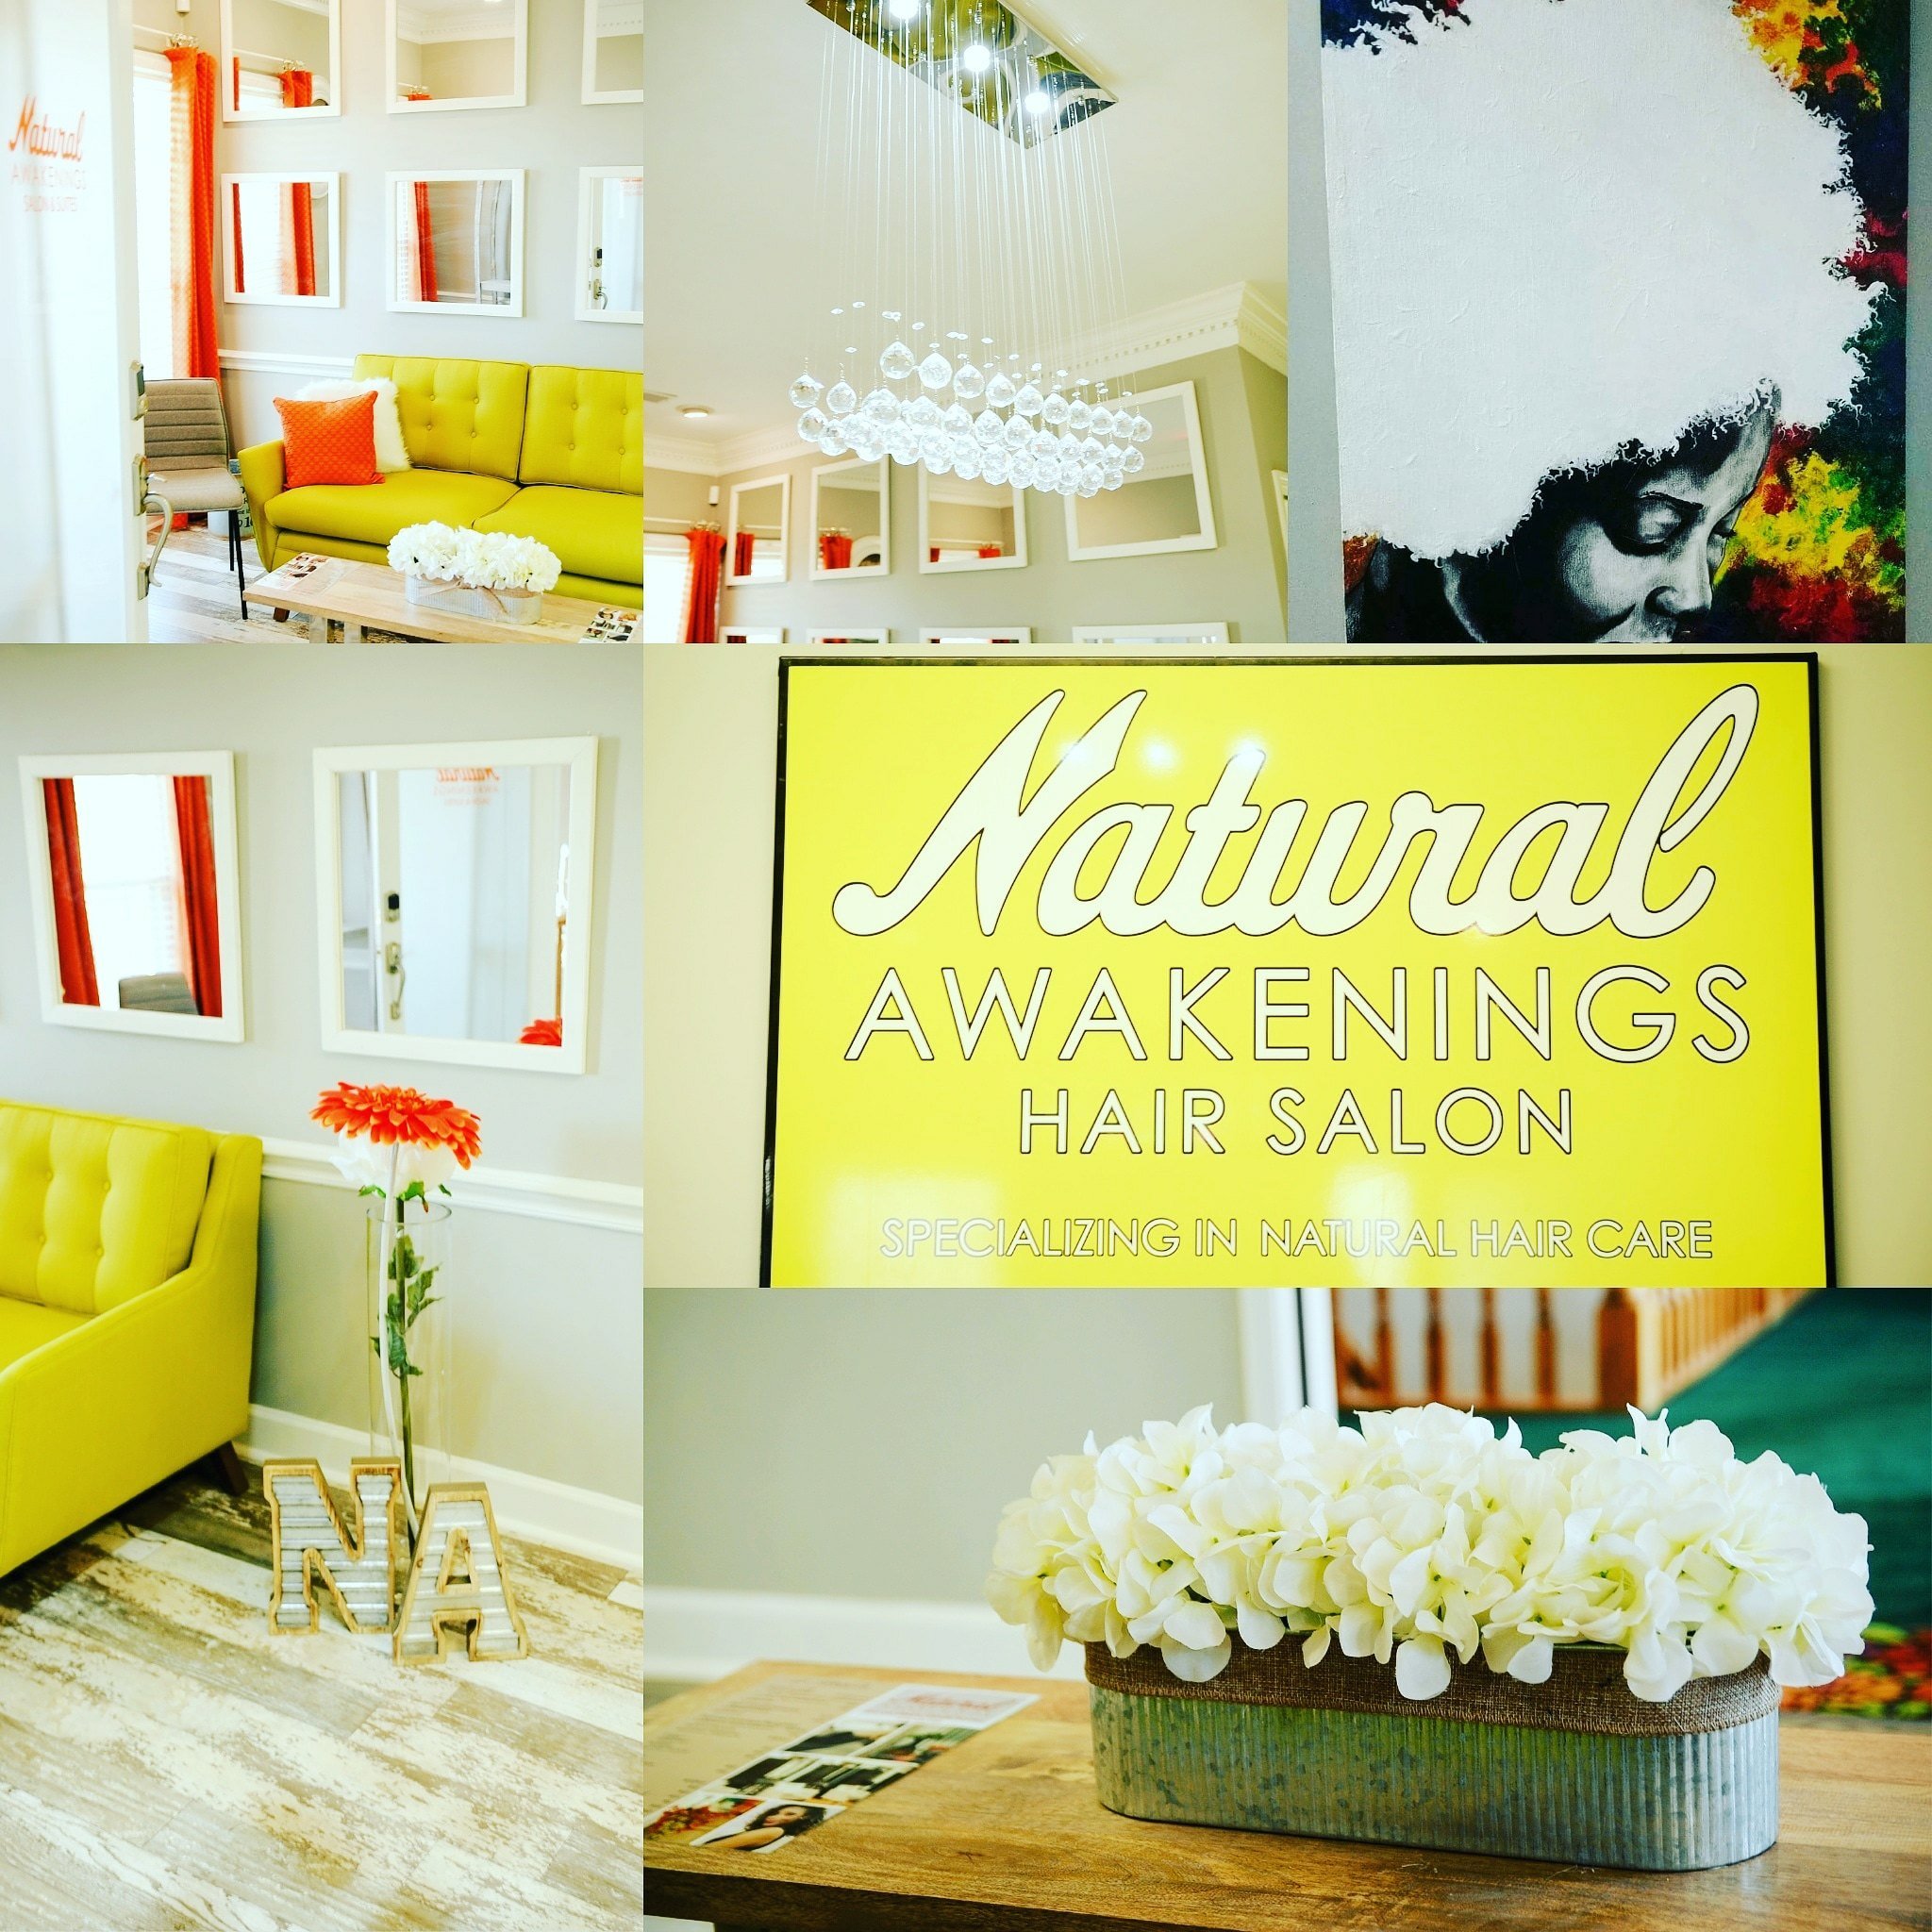 New location! 7009 Lenox Village Dr. Suite 104! 
Natural Awakenings is an intimate hair care suite specializing in natural hair care or relaxer free services.